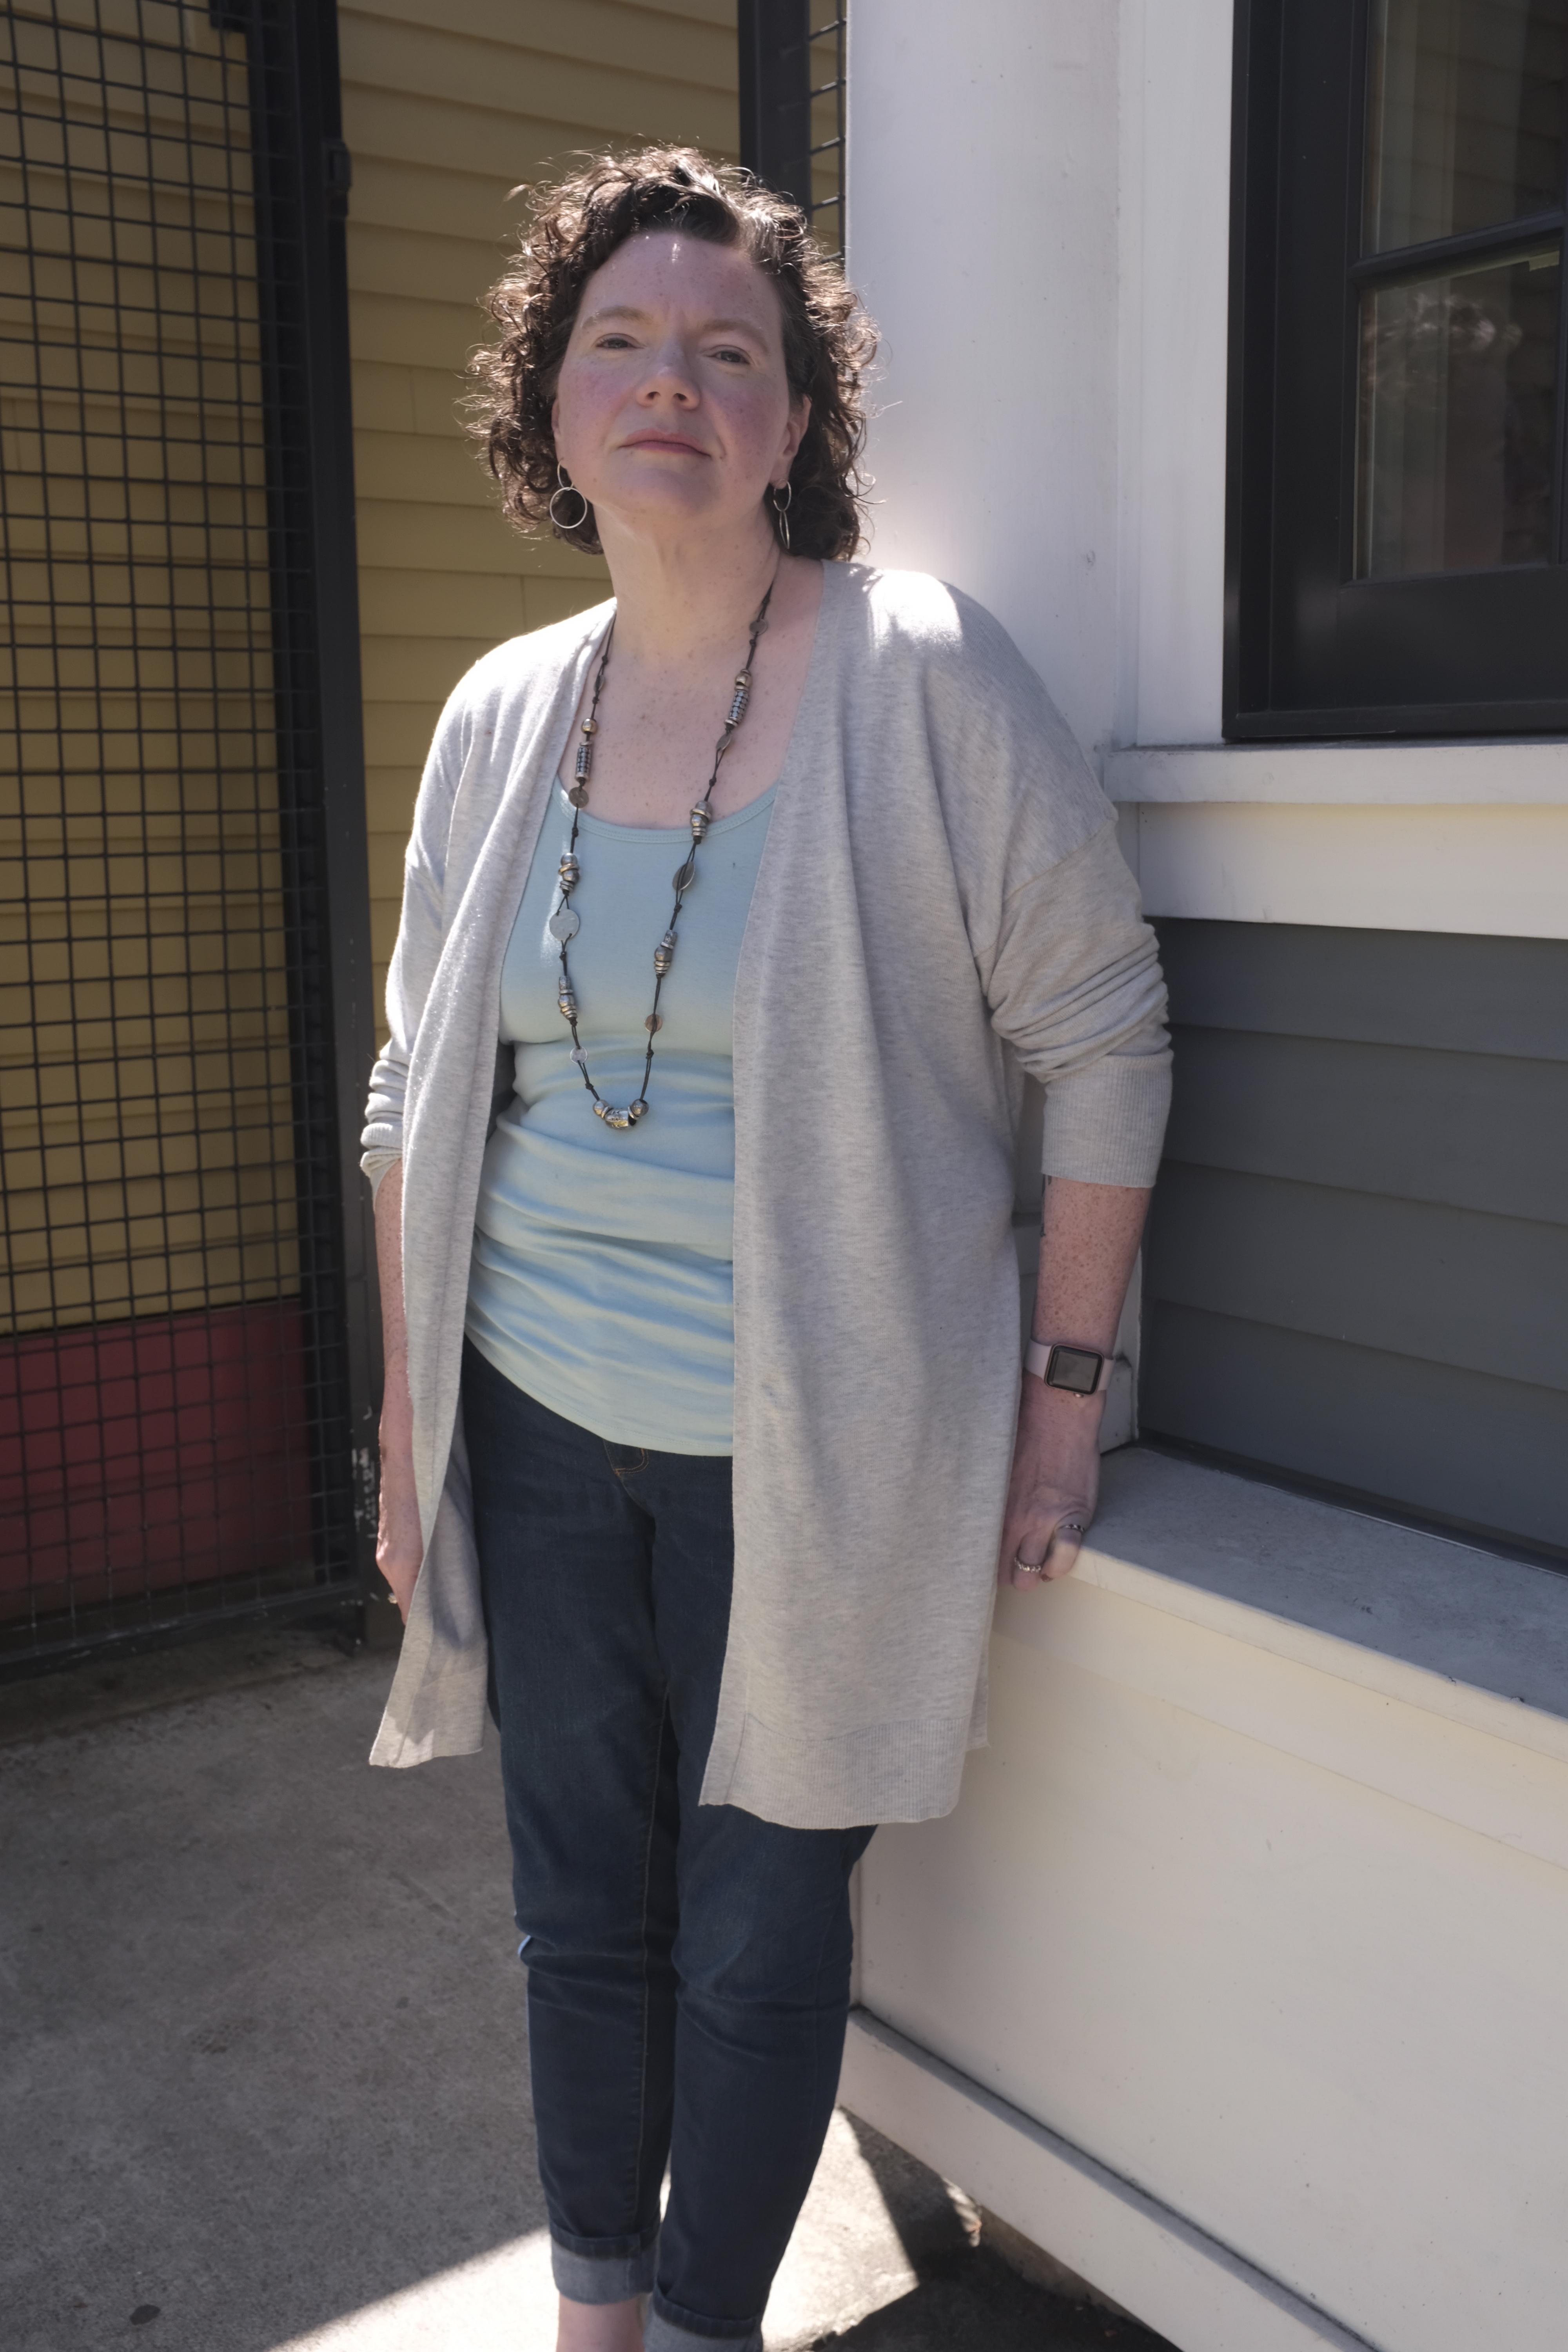 Photo: Meghan Eagen-Torkko, who sought miscarriage care at a Catholic hospital, stands in front of a wall.